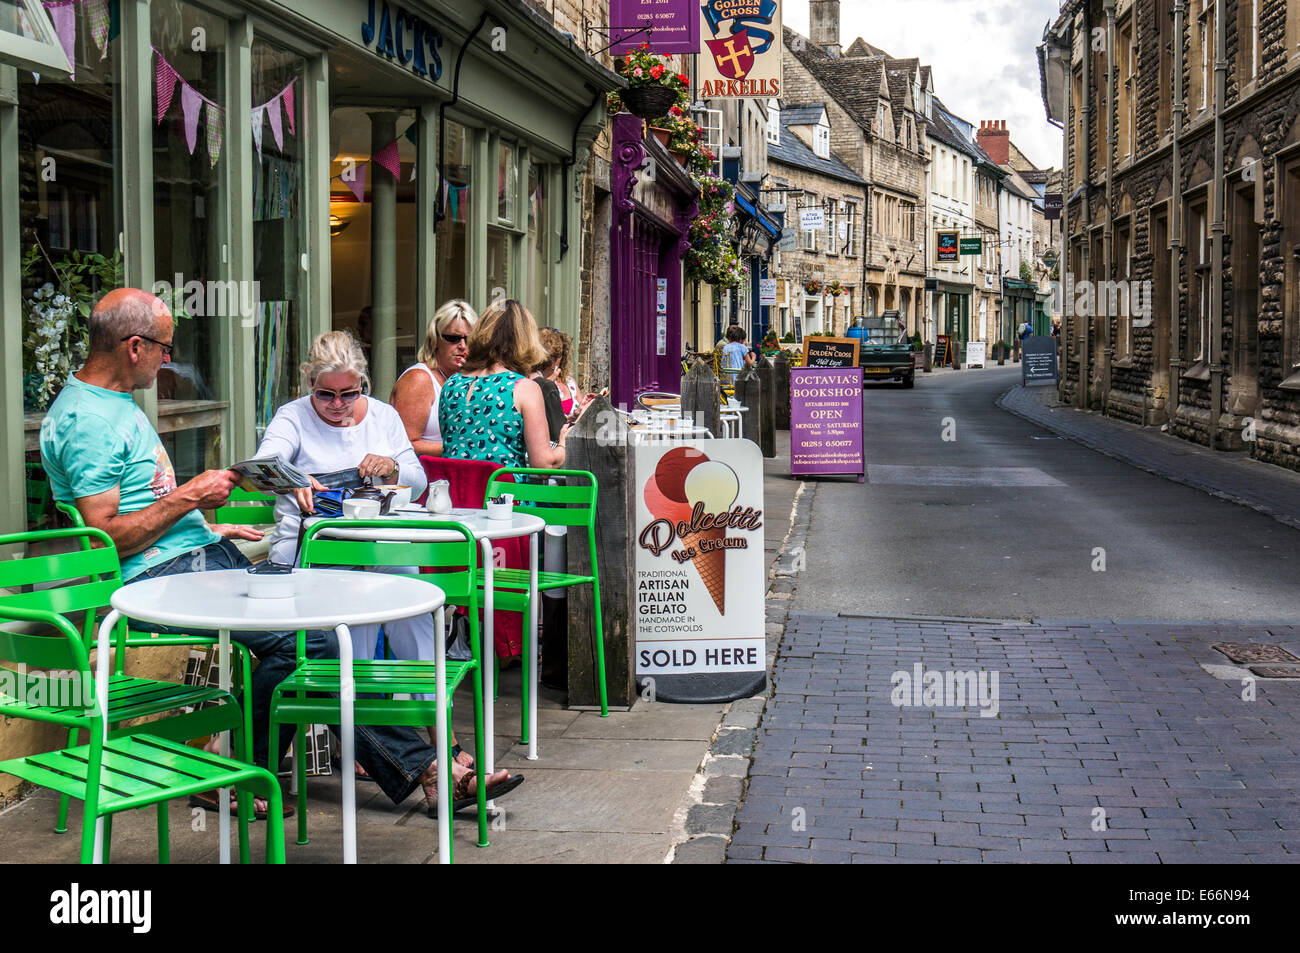 People sitting outside a cafe restaurant in a side street of shops in Cirencester town centre, Cotswolds, Gloucestershire, England, UK. Stock Photo